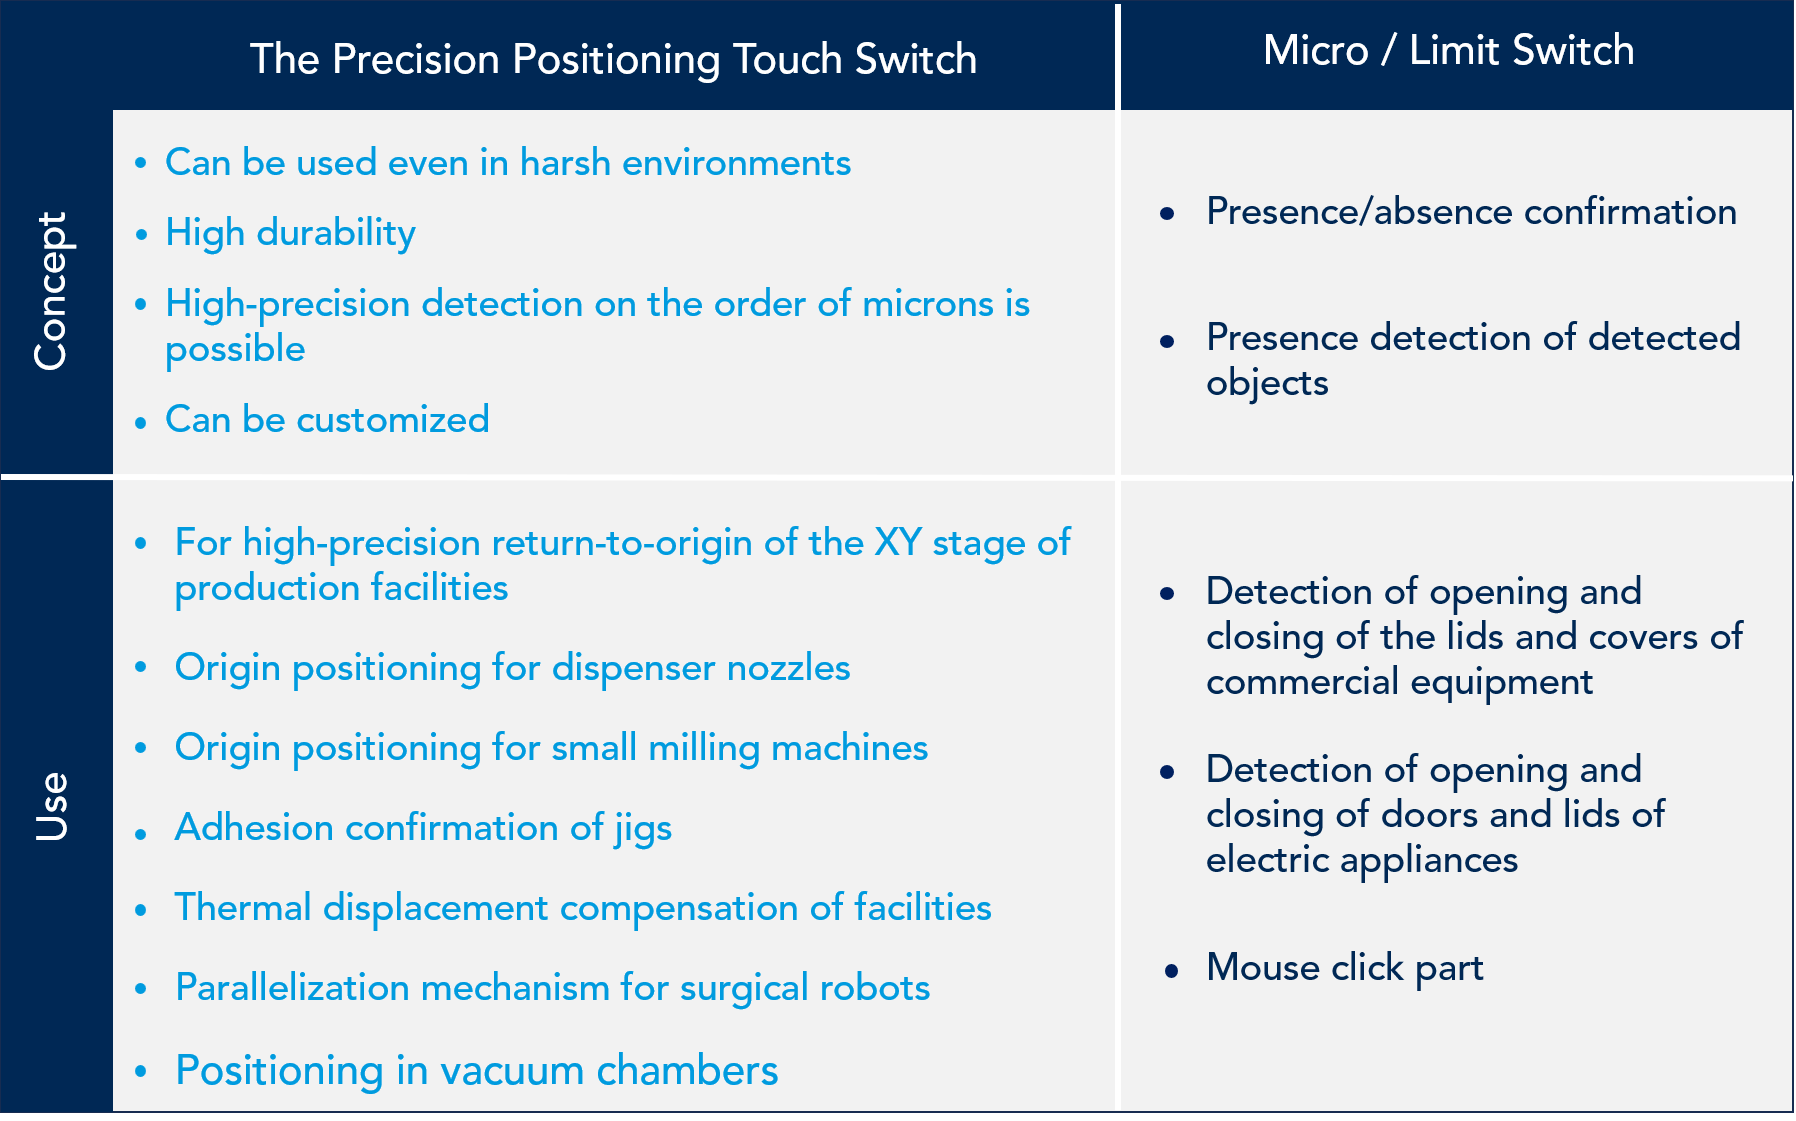 Difference between Microswitch and Precision Positioning Touch Switch